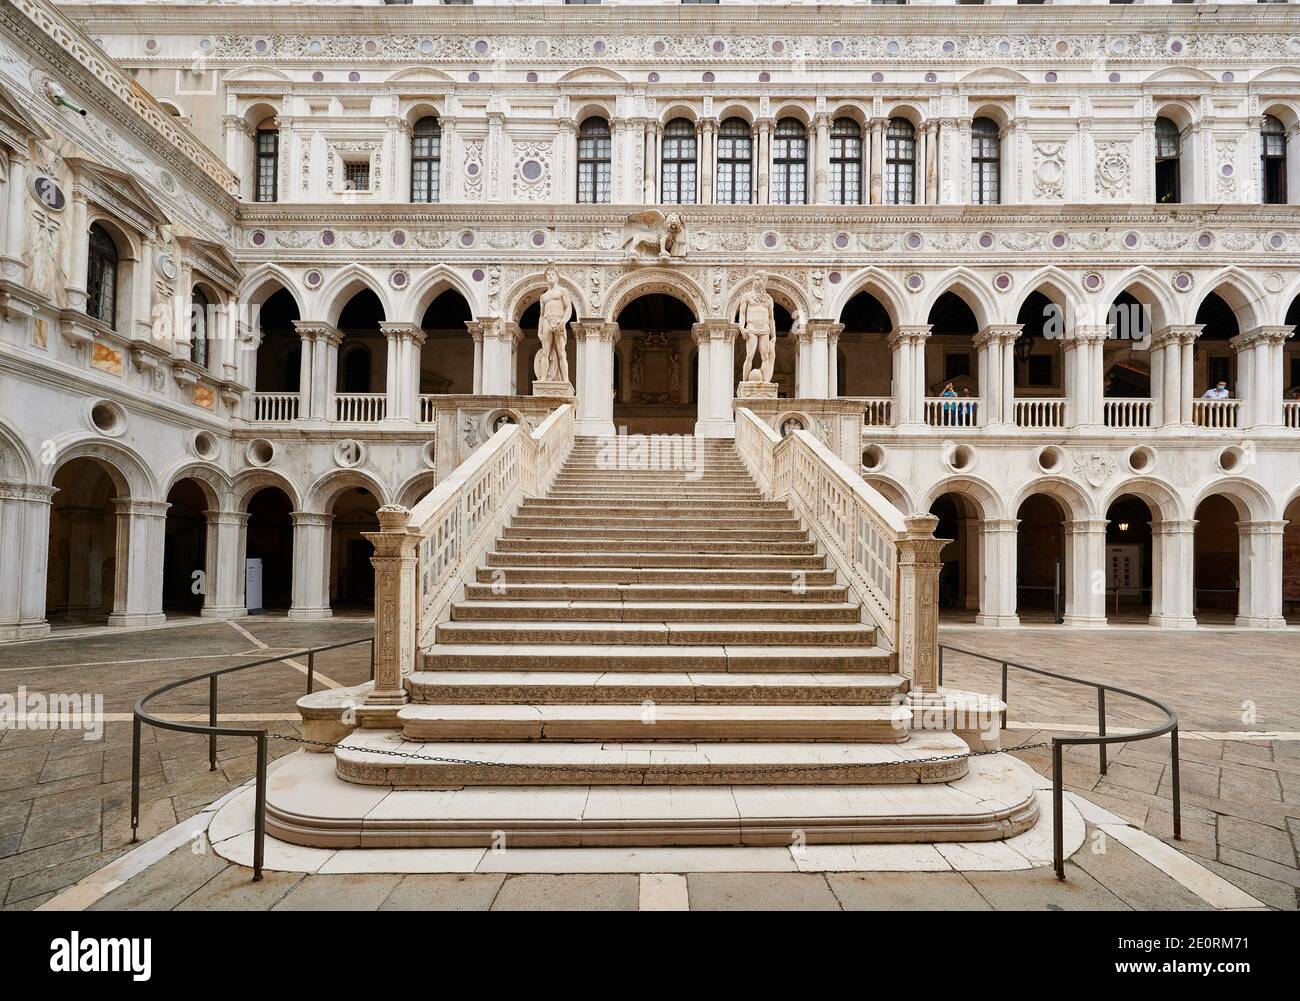 inner courtyard of Doge's Palace, Palazzo Ducale with staircase Scala dei Giganti, Venice, Veneto, Italy Stock Photo